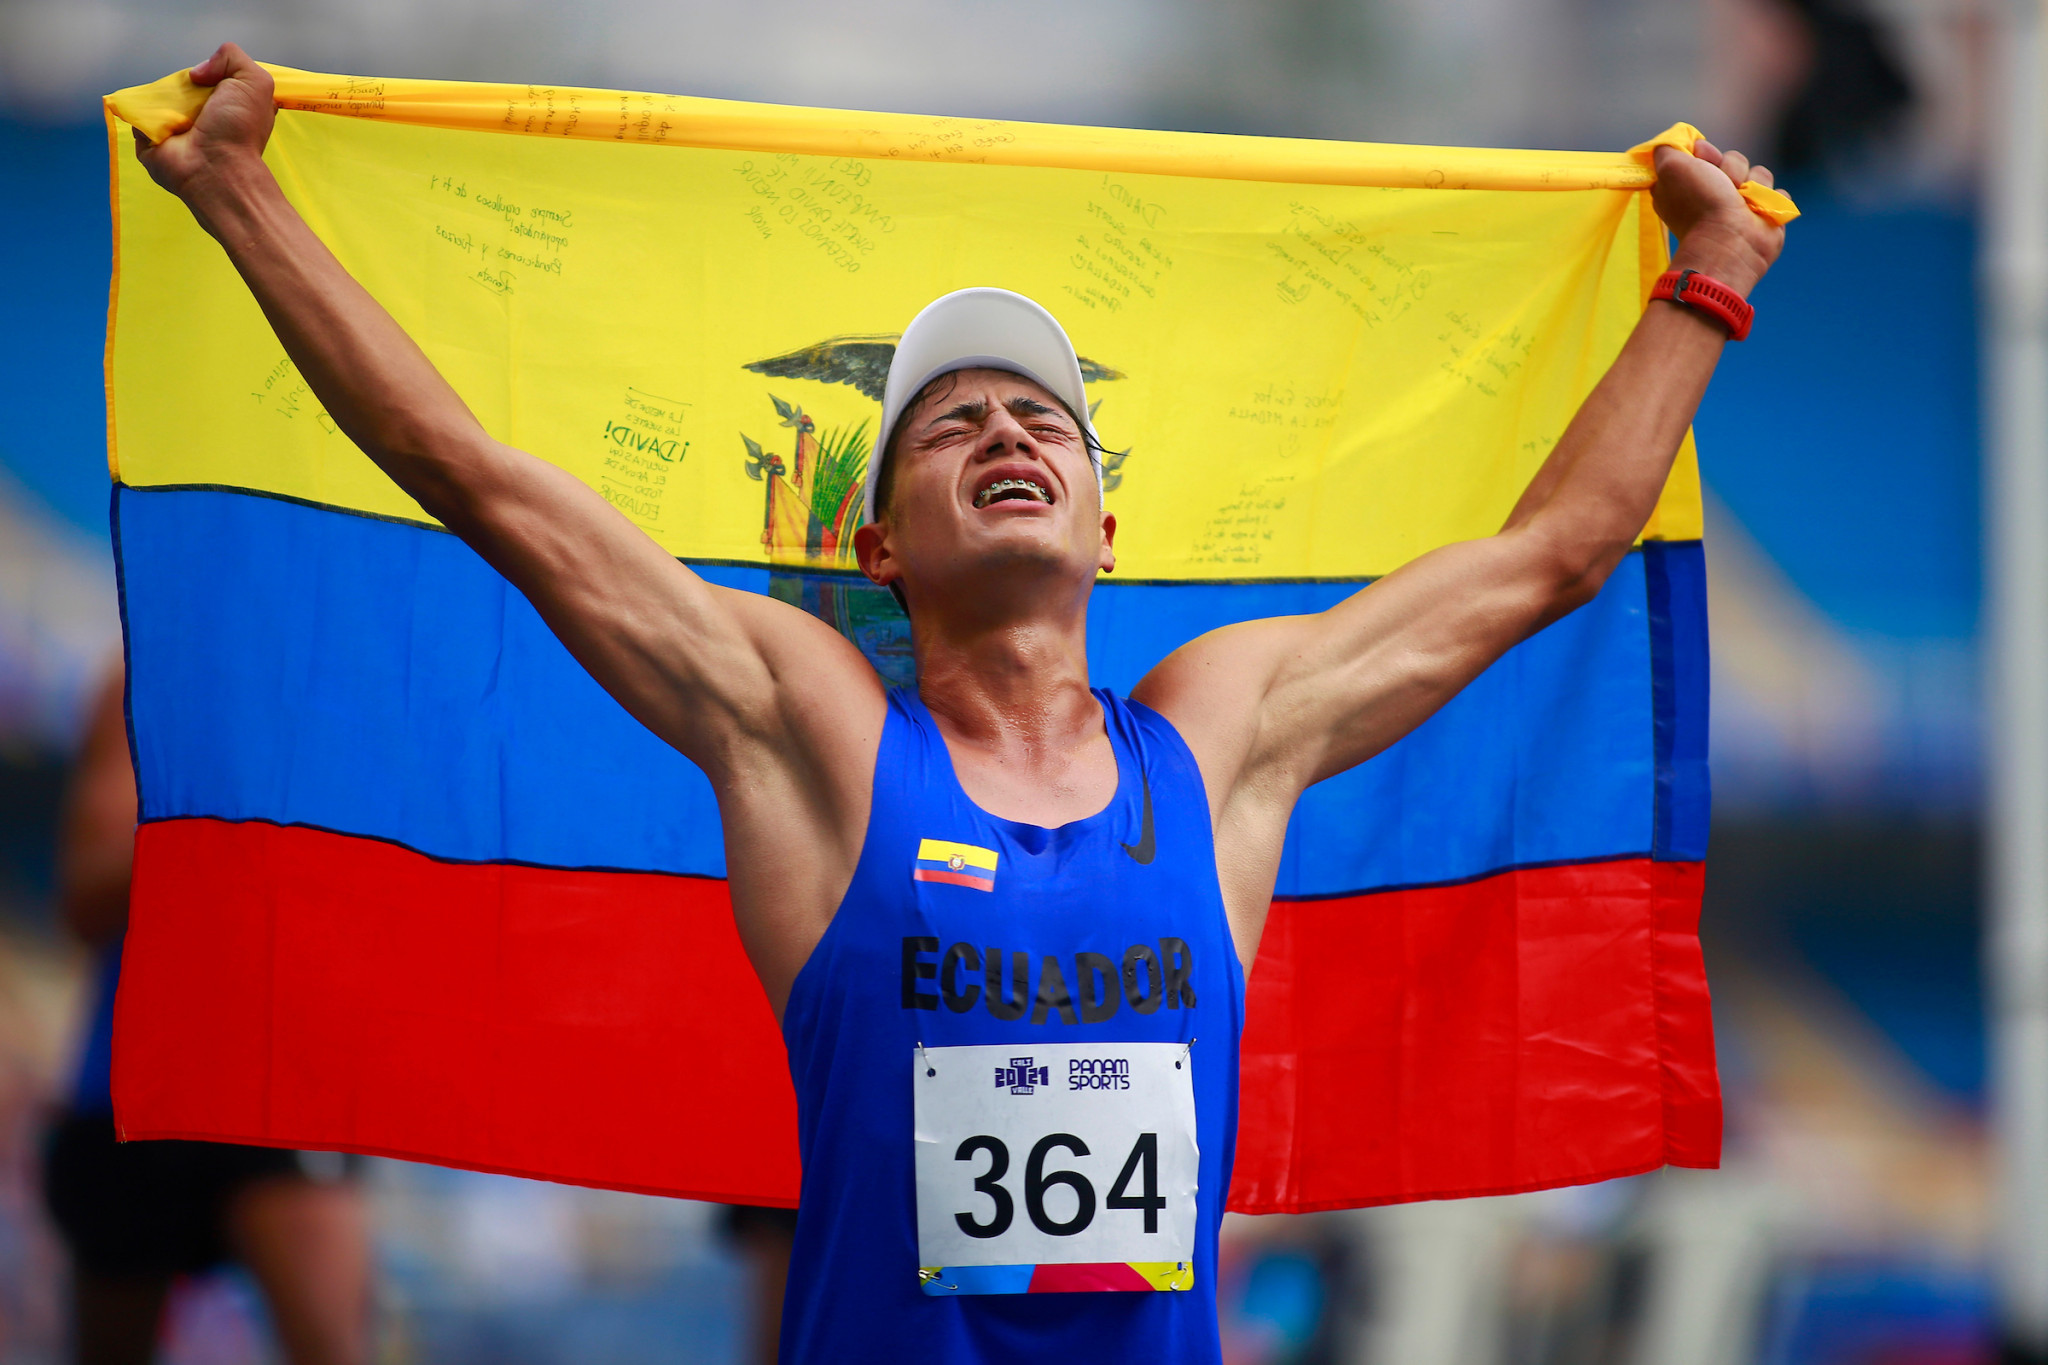 Alexander Hurtado carried the Ecuadorian flag with him as he crossed the finish line first in the men's 20,000m race walk ©Agencia.Xpress Media